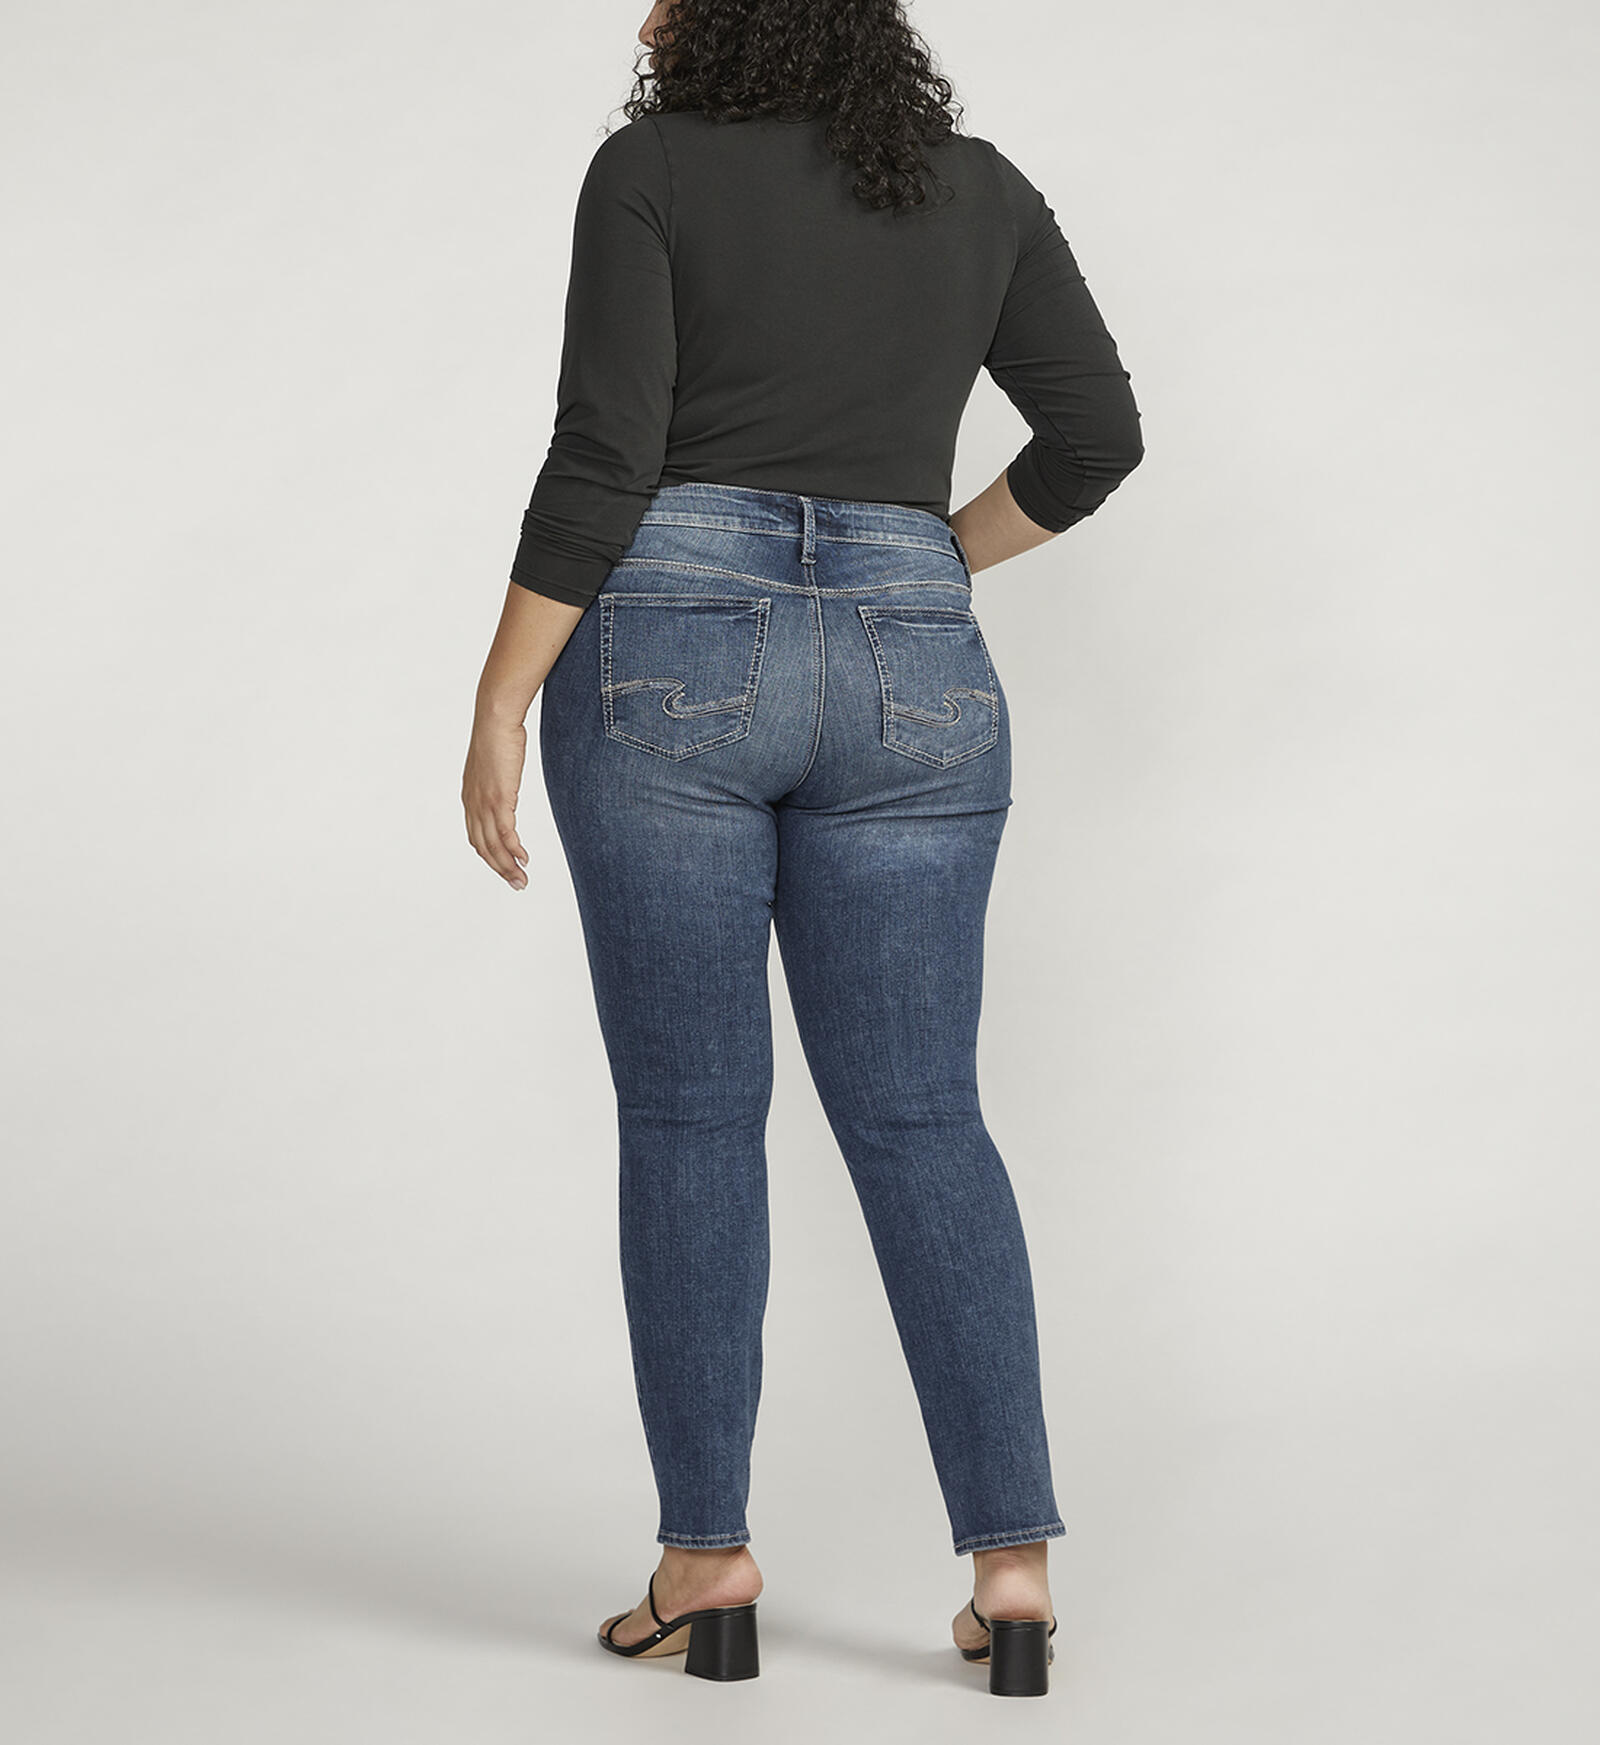 Buy Elyse Mid Rise Straight Leg Jeans Plus Size for USD 74.00